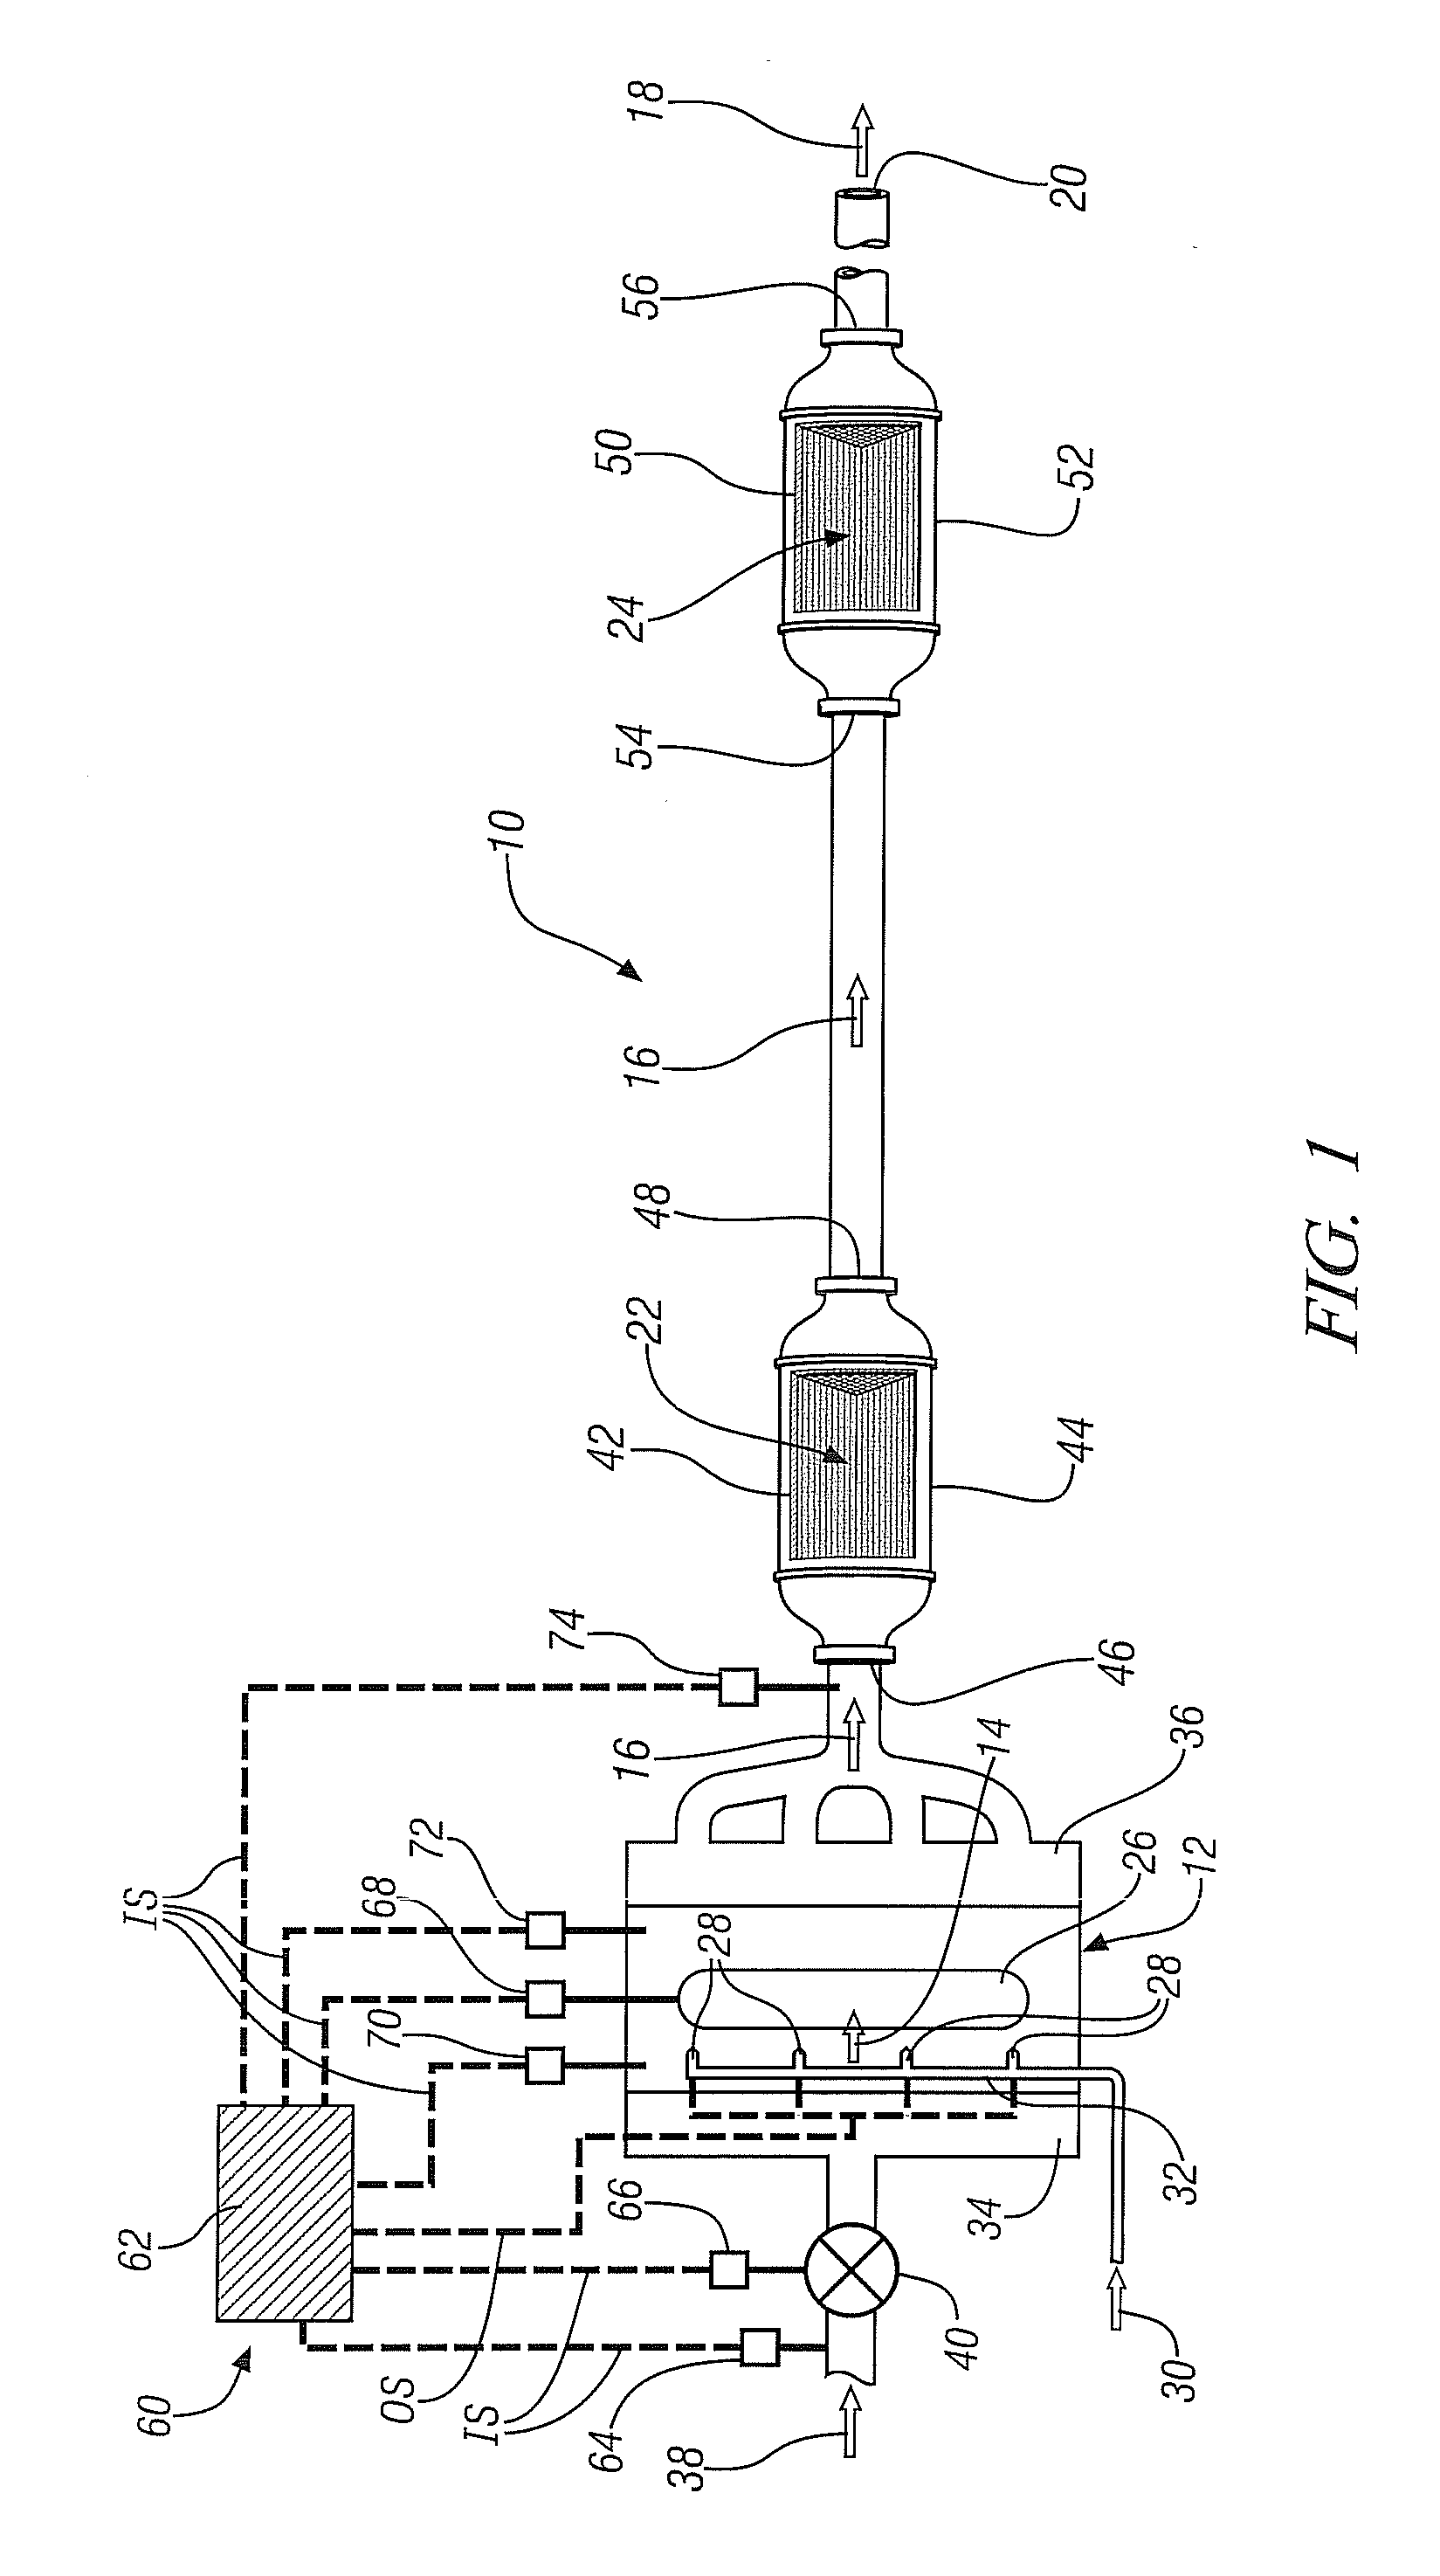 Exhaust aftertreatment systems that include an ammonia-scr catalyst promoted with an oxygen storage material